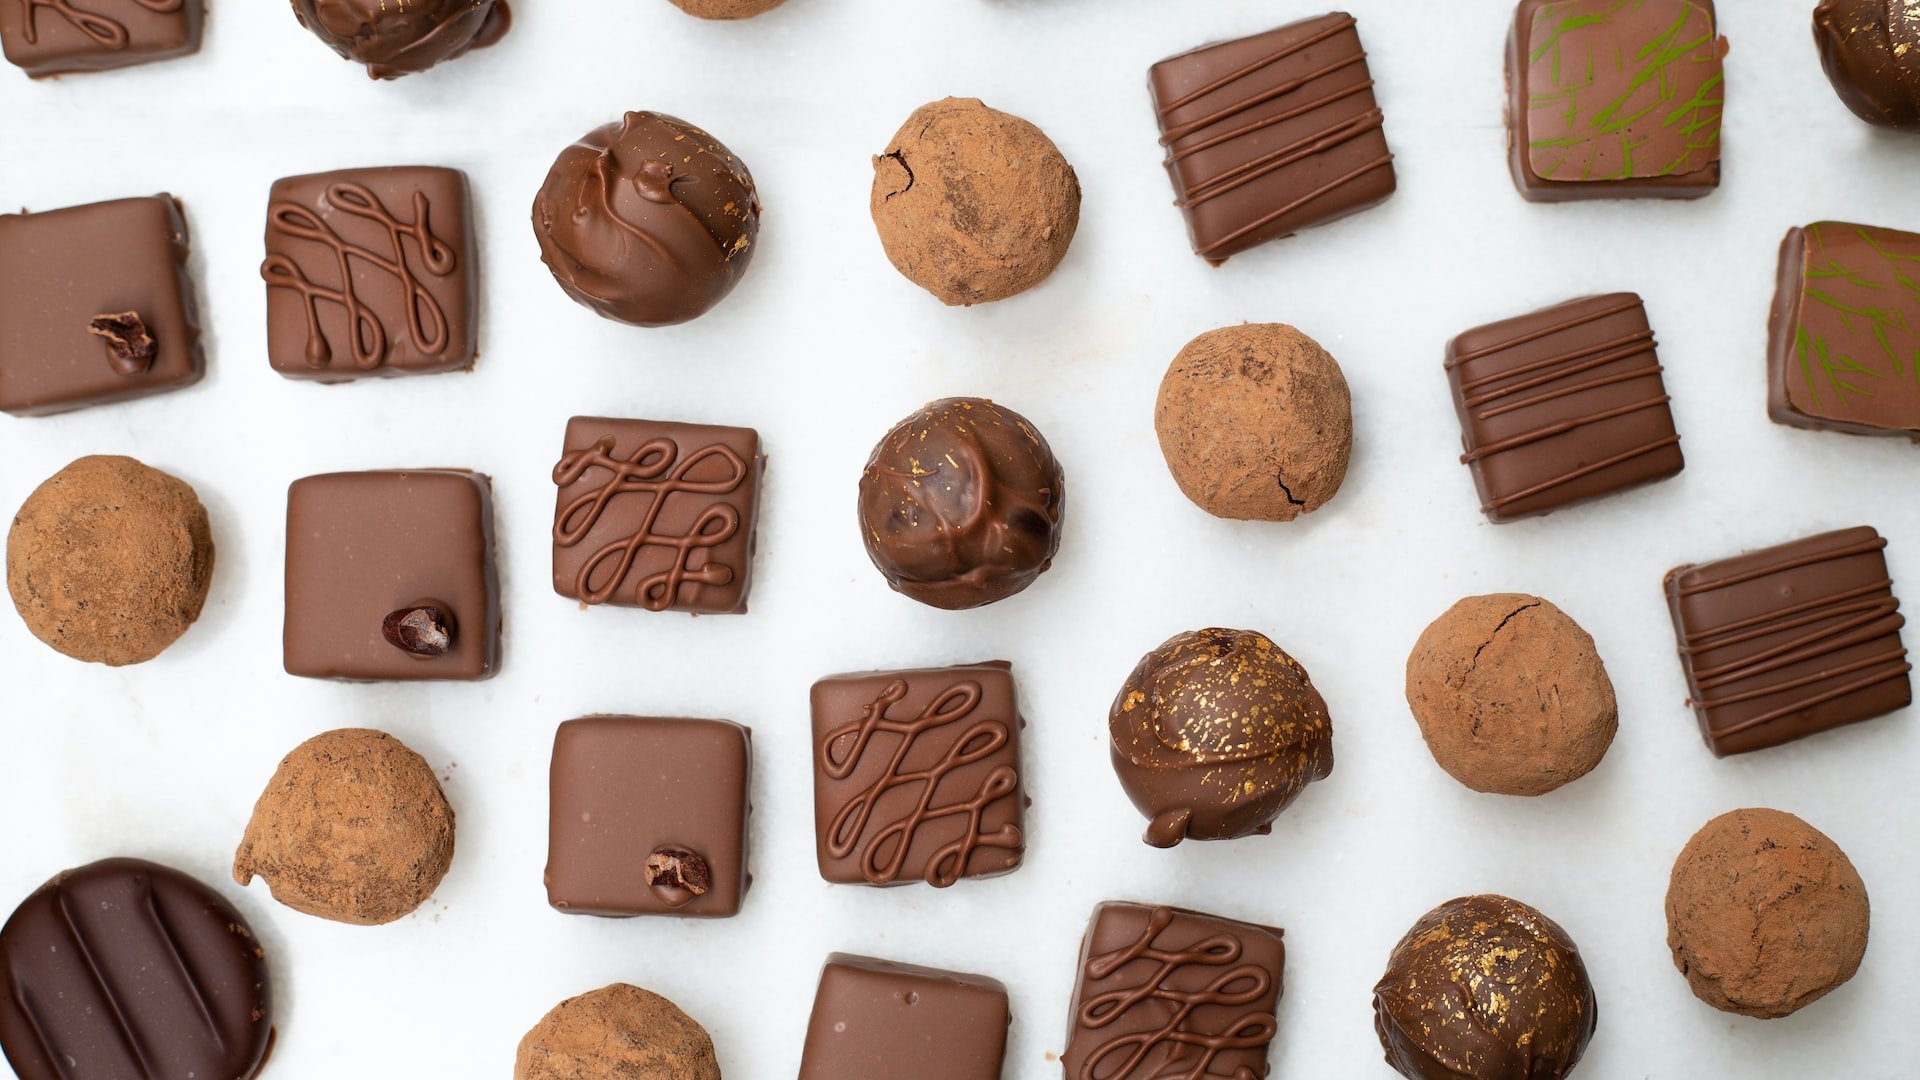 6 Chocolate Gifts for the Chocaholic in Your Life